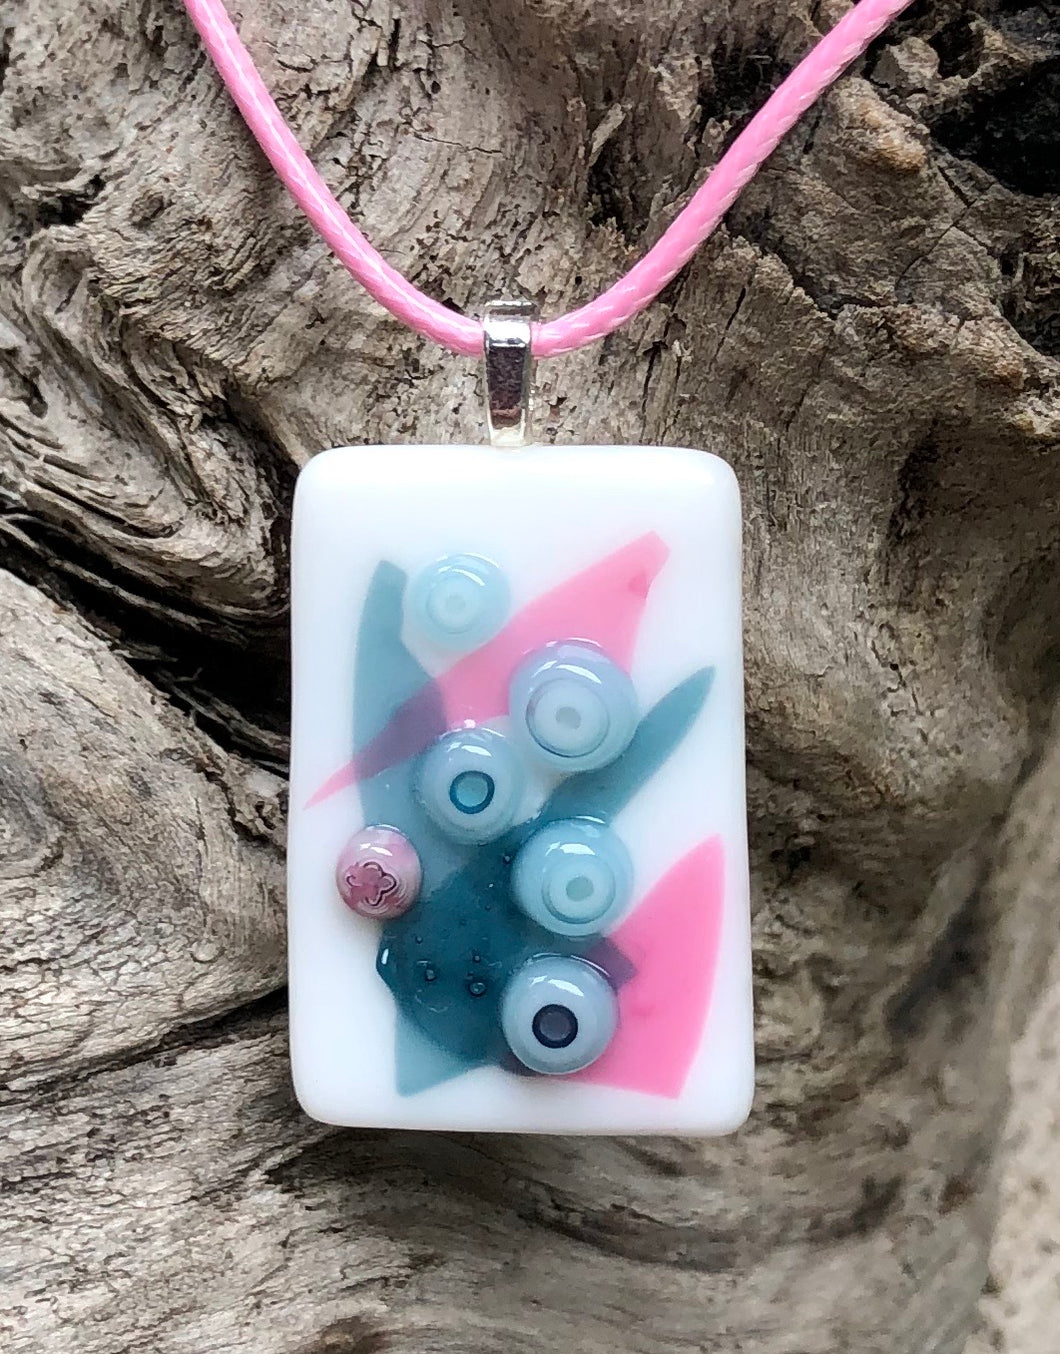 This simple Fused Glass Pendant incorporates Pink and Slate Blue Murrini blooms on Pink and Slate Blue abstract shapes and measures 1 1/4” by 3/4”. The Pale Pink waxed Irish cotton cord is adjustable from 17 1/2” by 18 3/4”.